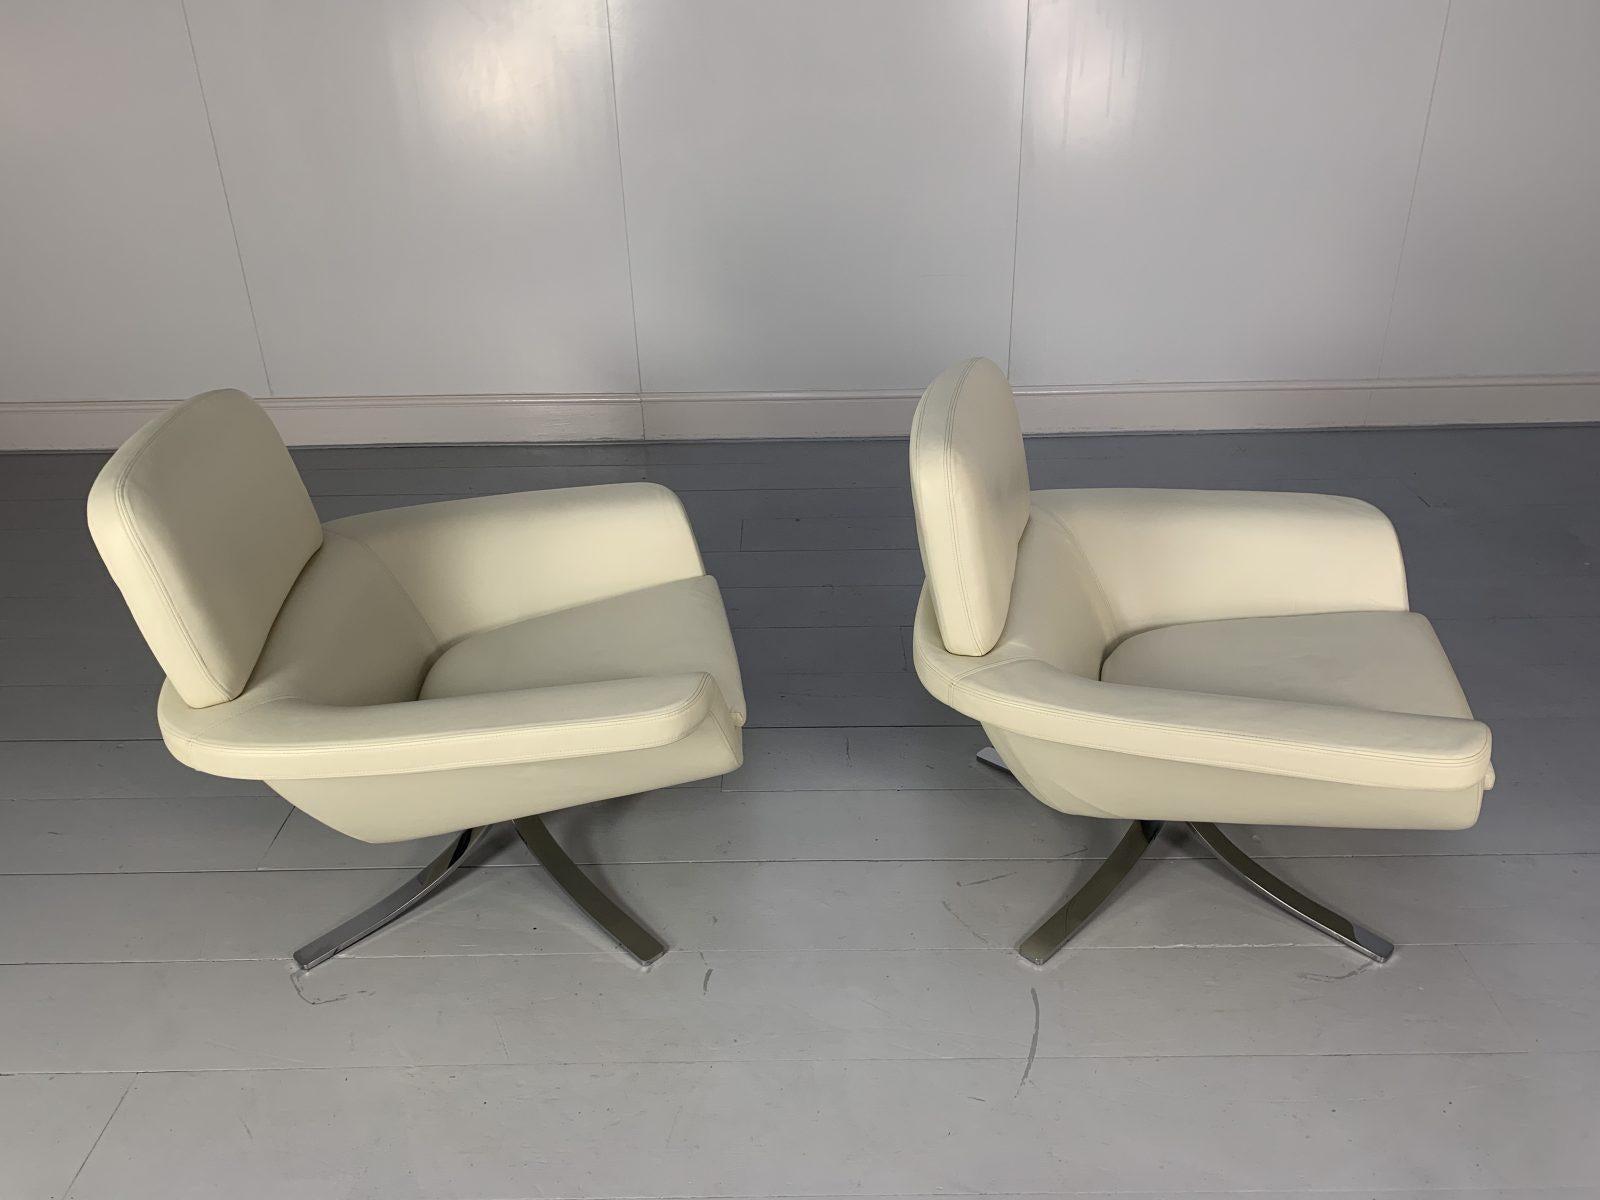 Minotti “Blake Soft” Armchairs, in Ivory Leather 1